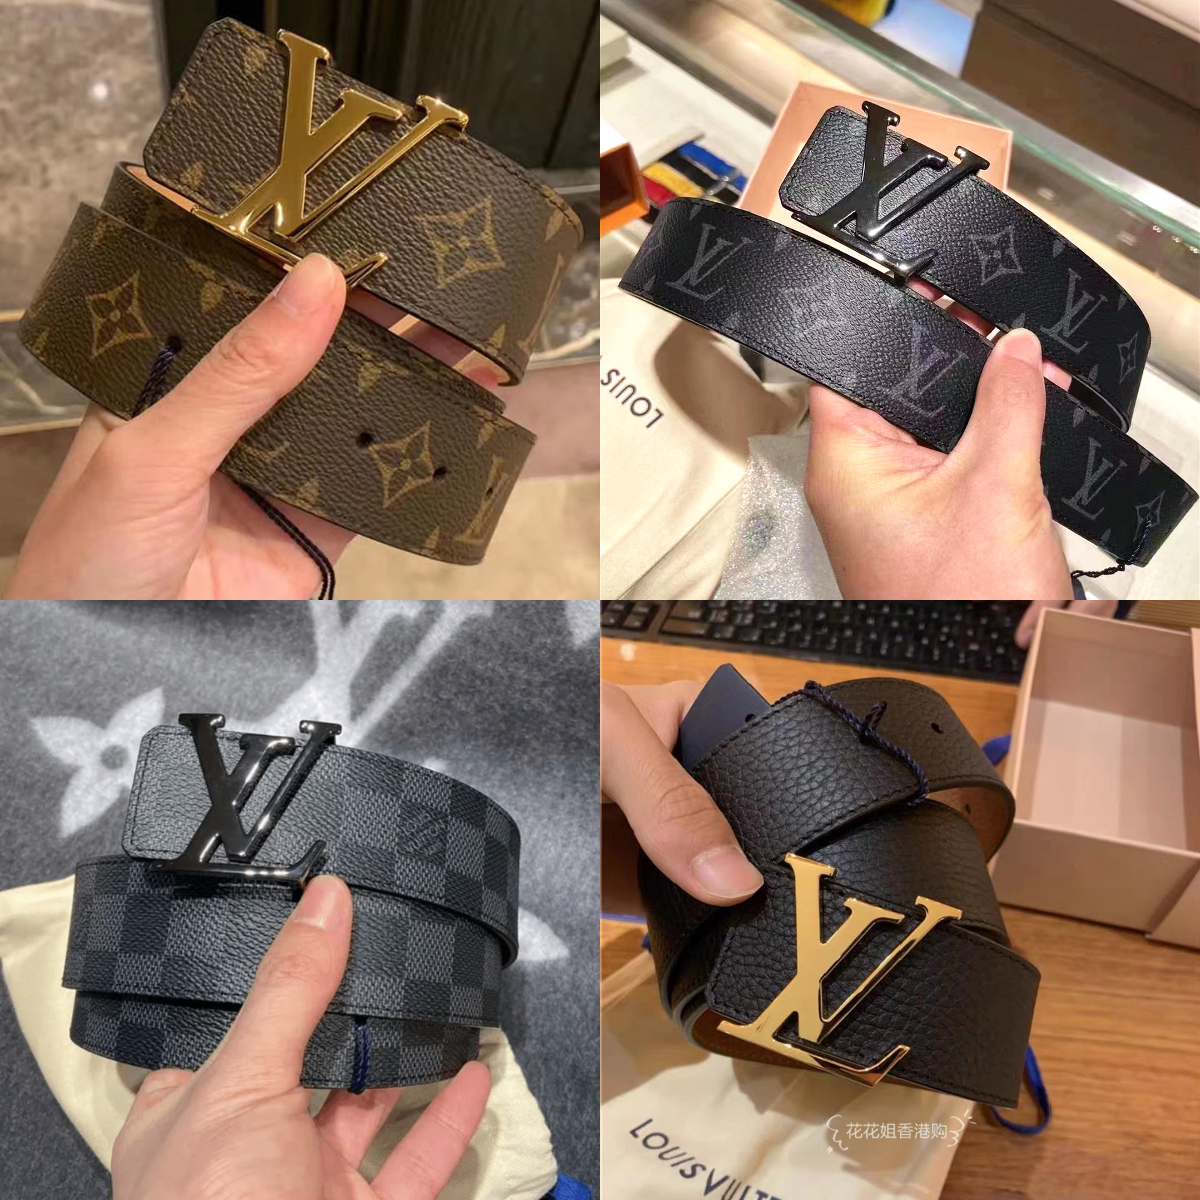 Louis Vuitton Gold Buckle Leather Belt – CoJpGeneral